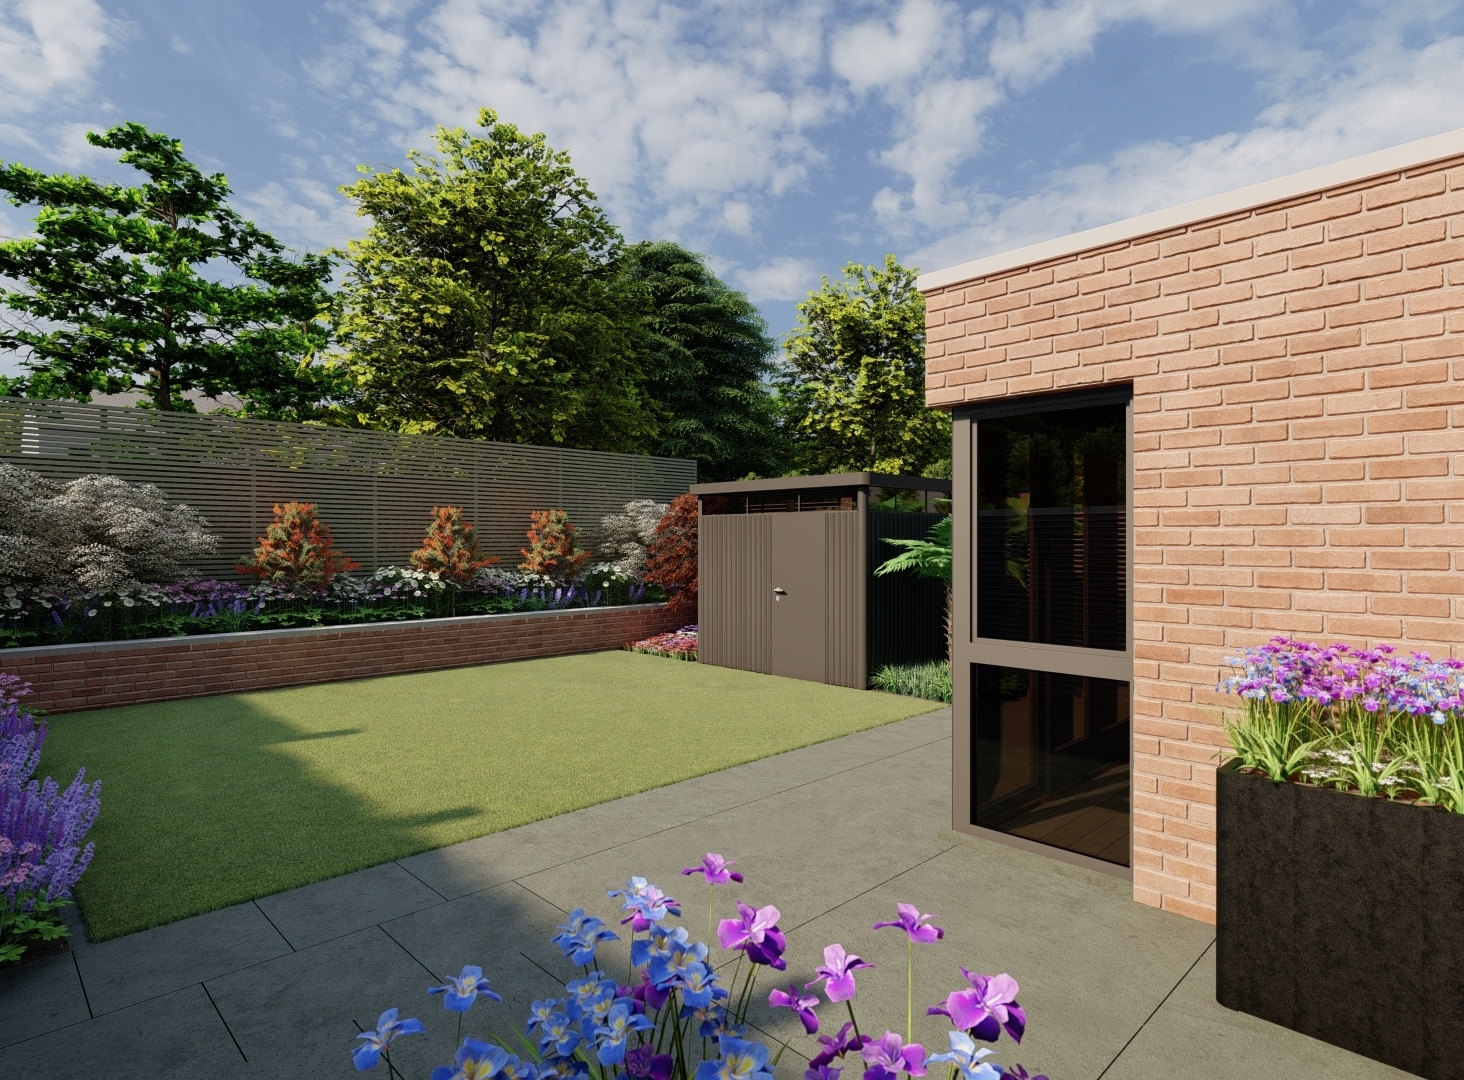 Design Visual for small family garden in Blackrock, Co Dublin featuring Biohort HighLine Shed, Bespoke Garden Fencing, sweeping Limestone pathway, synthetic grass area, Specimen trees and Limestone Patio